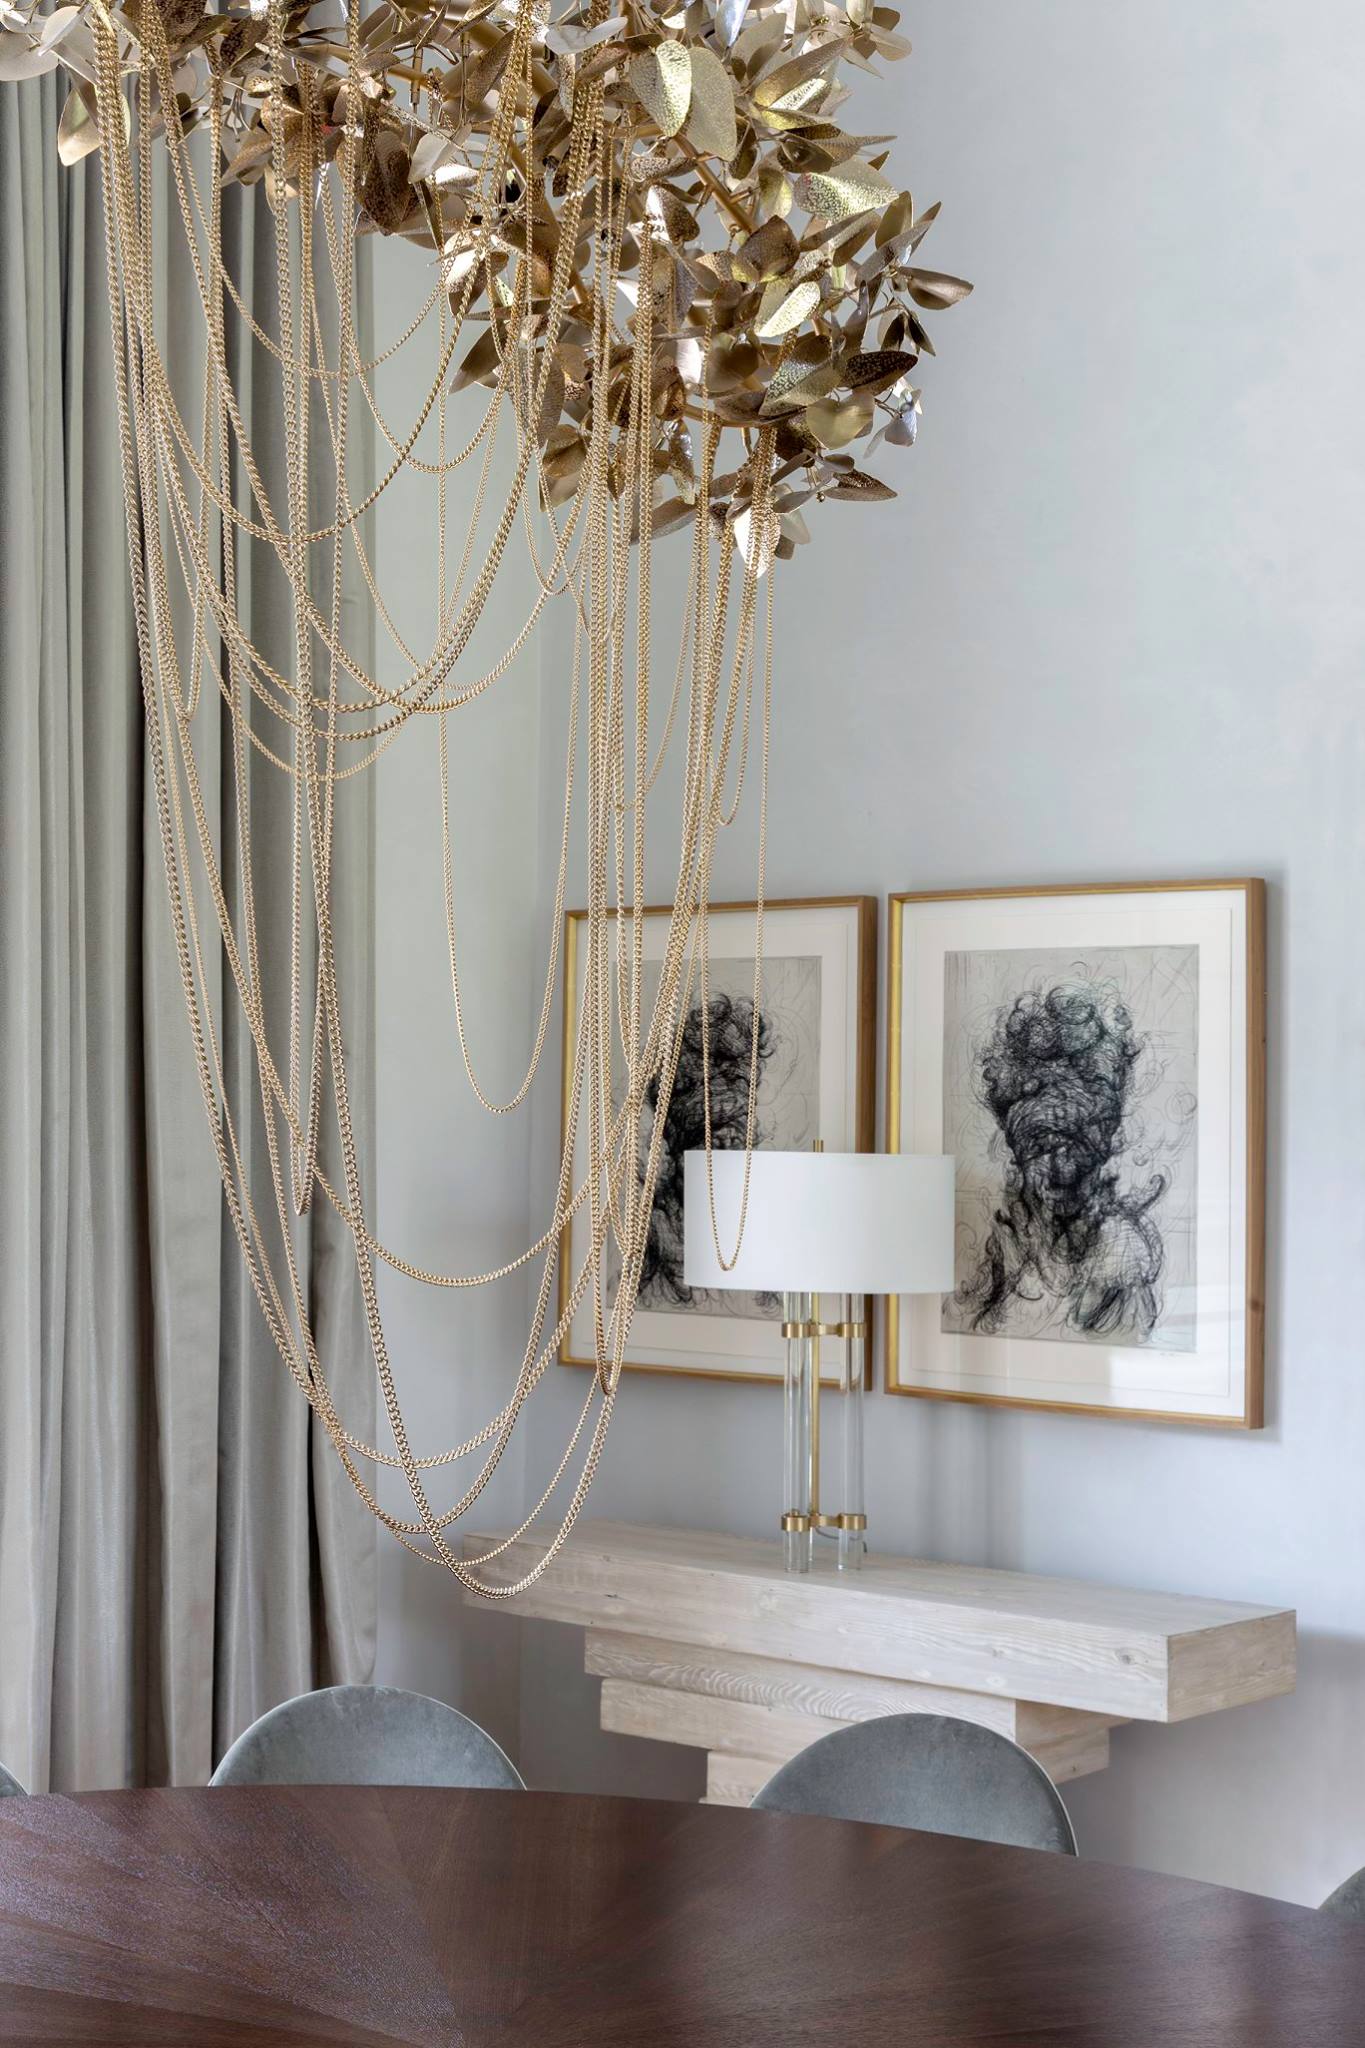 Talbot Cooley Interiors: Luxury Interior Design With The Blalock Home